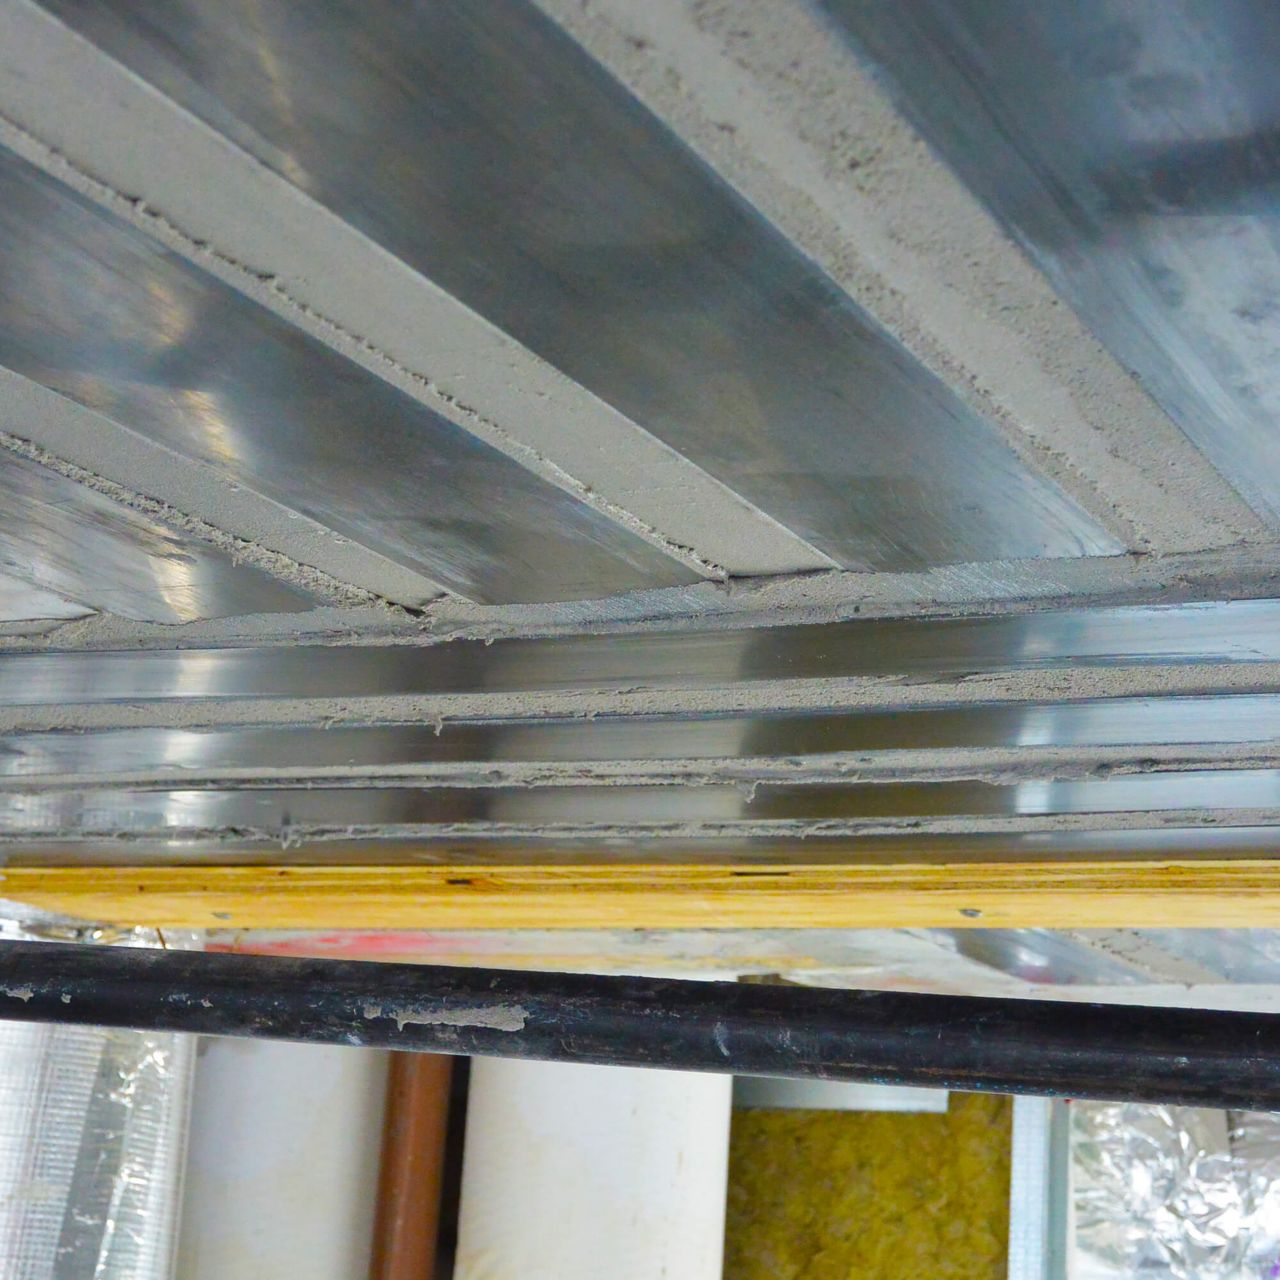 structural strengthening strips on ceiling